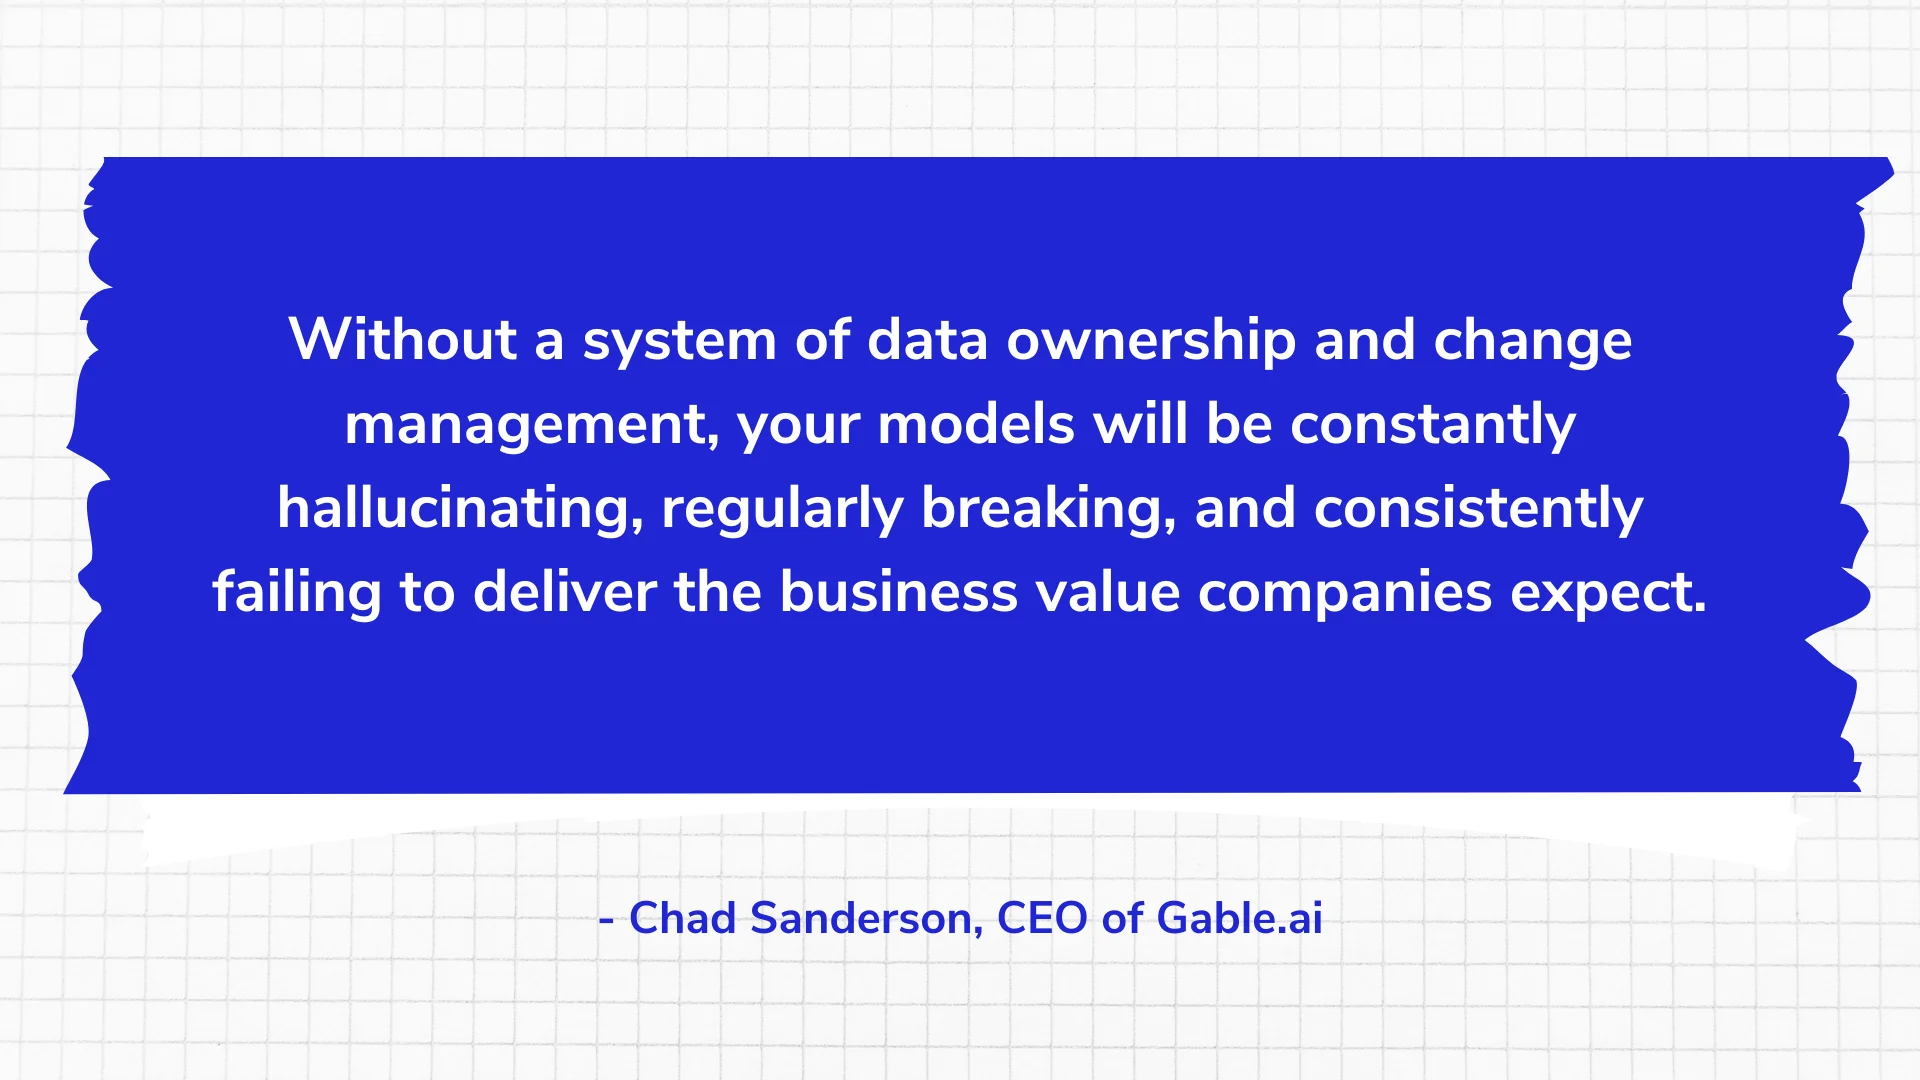 Without a system of data ownership and change management, your models will be constantly hallucinating, regularly breaking, and consistently failing to deliver the business value companies expect